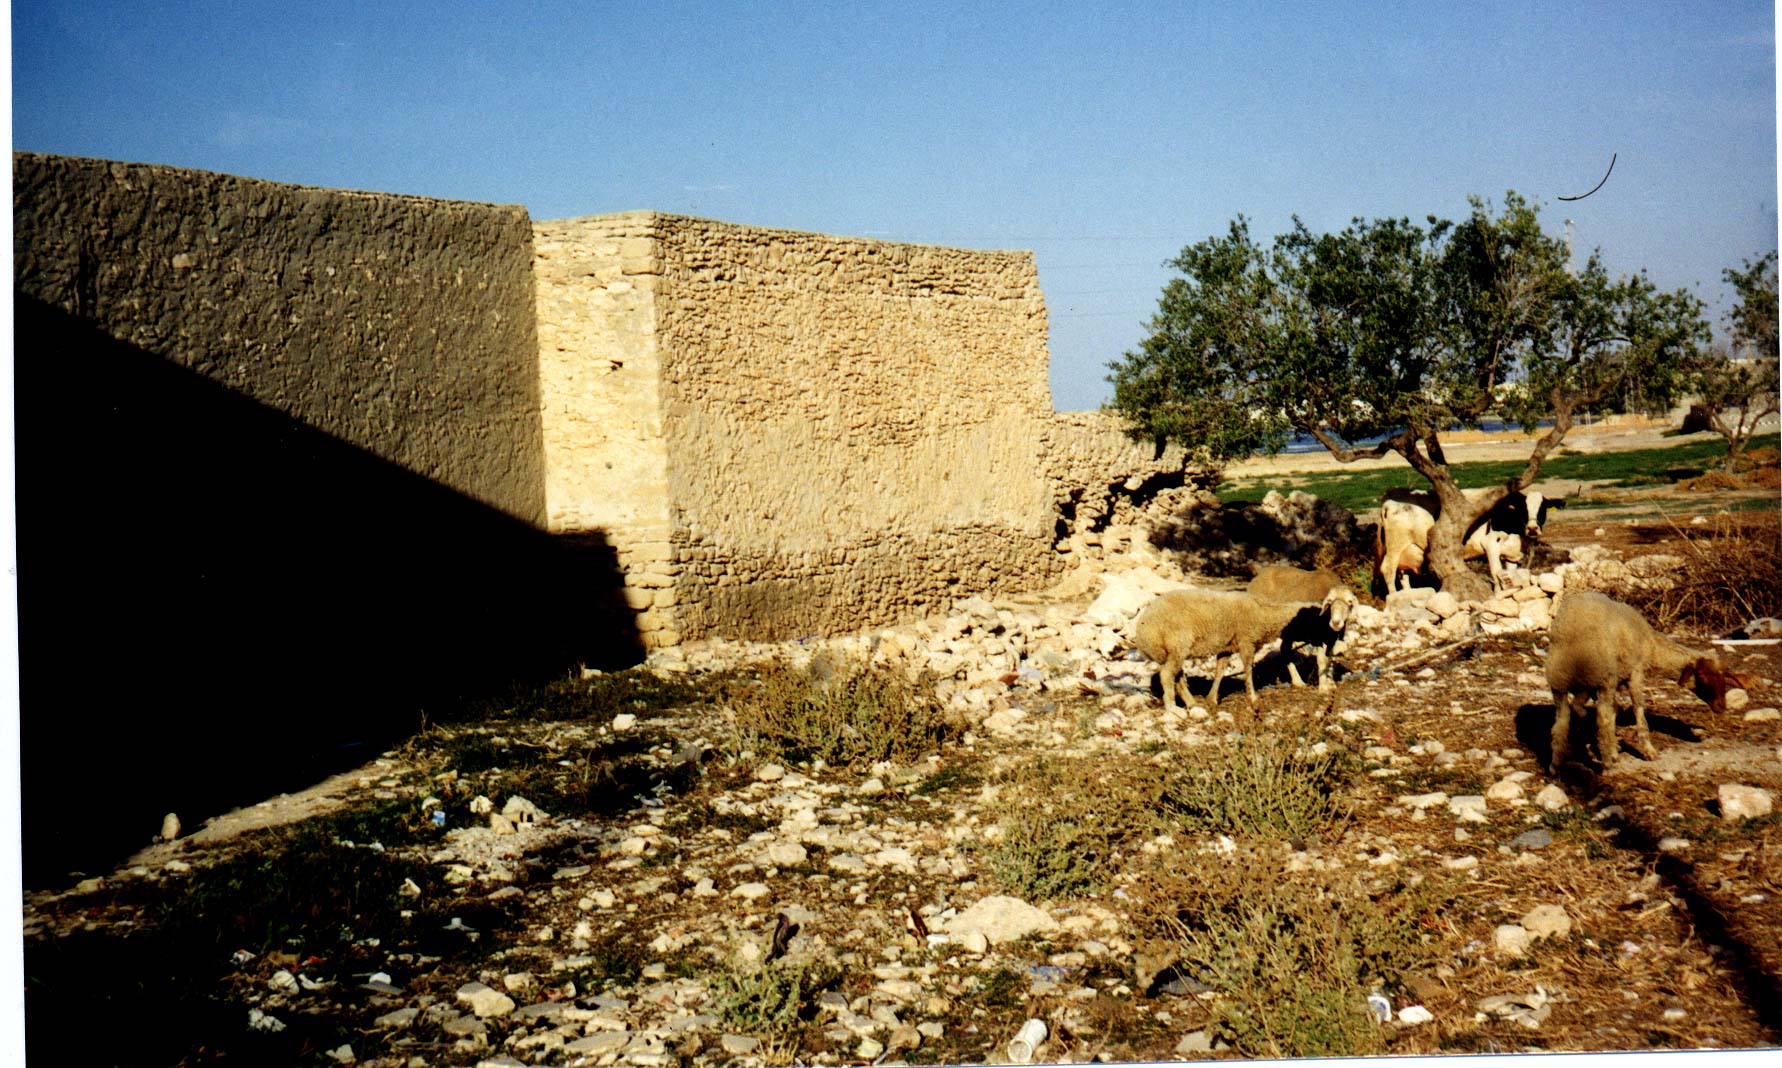 A Ribat, or fort, in North Africa